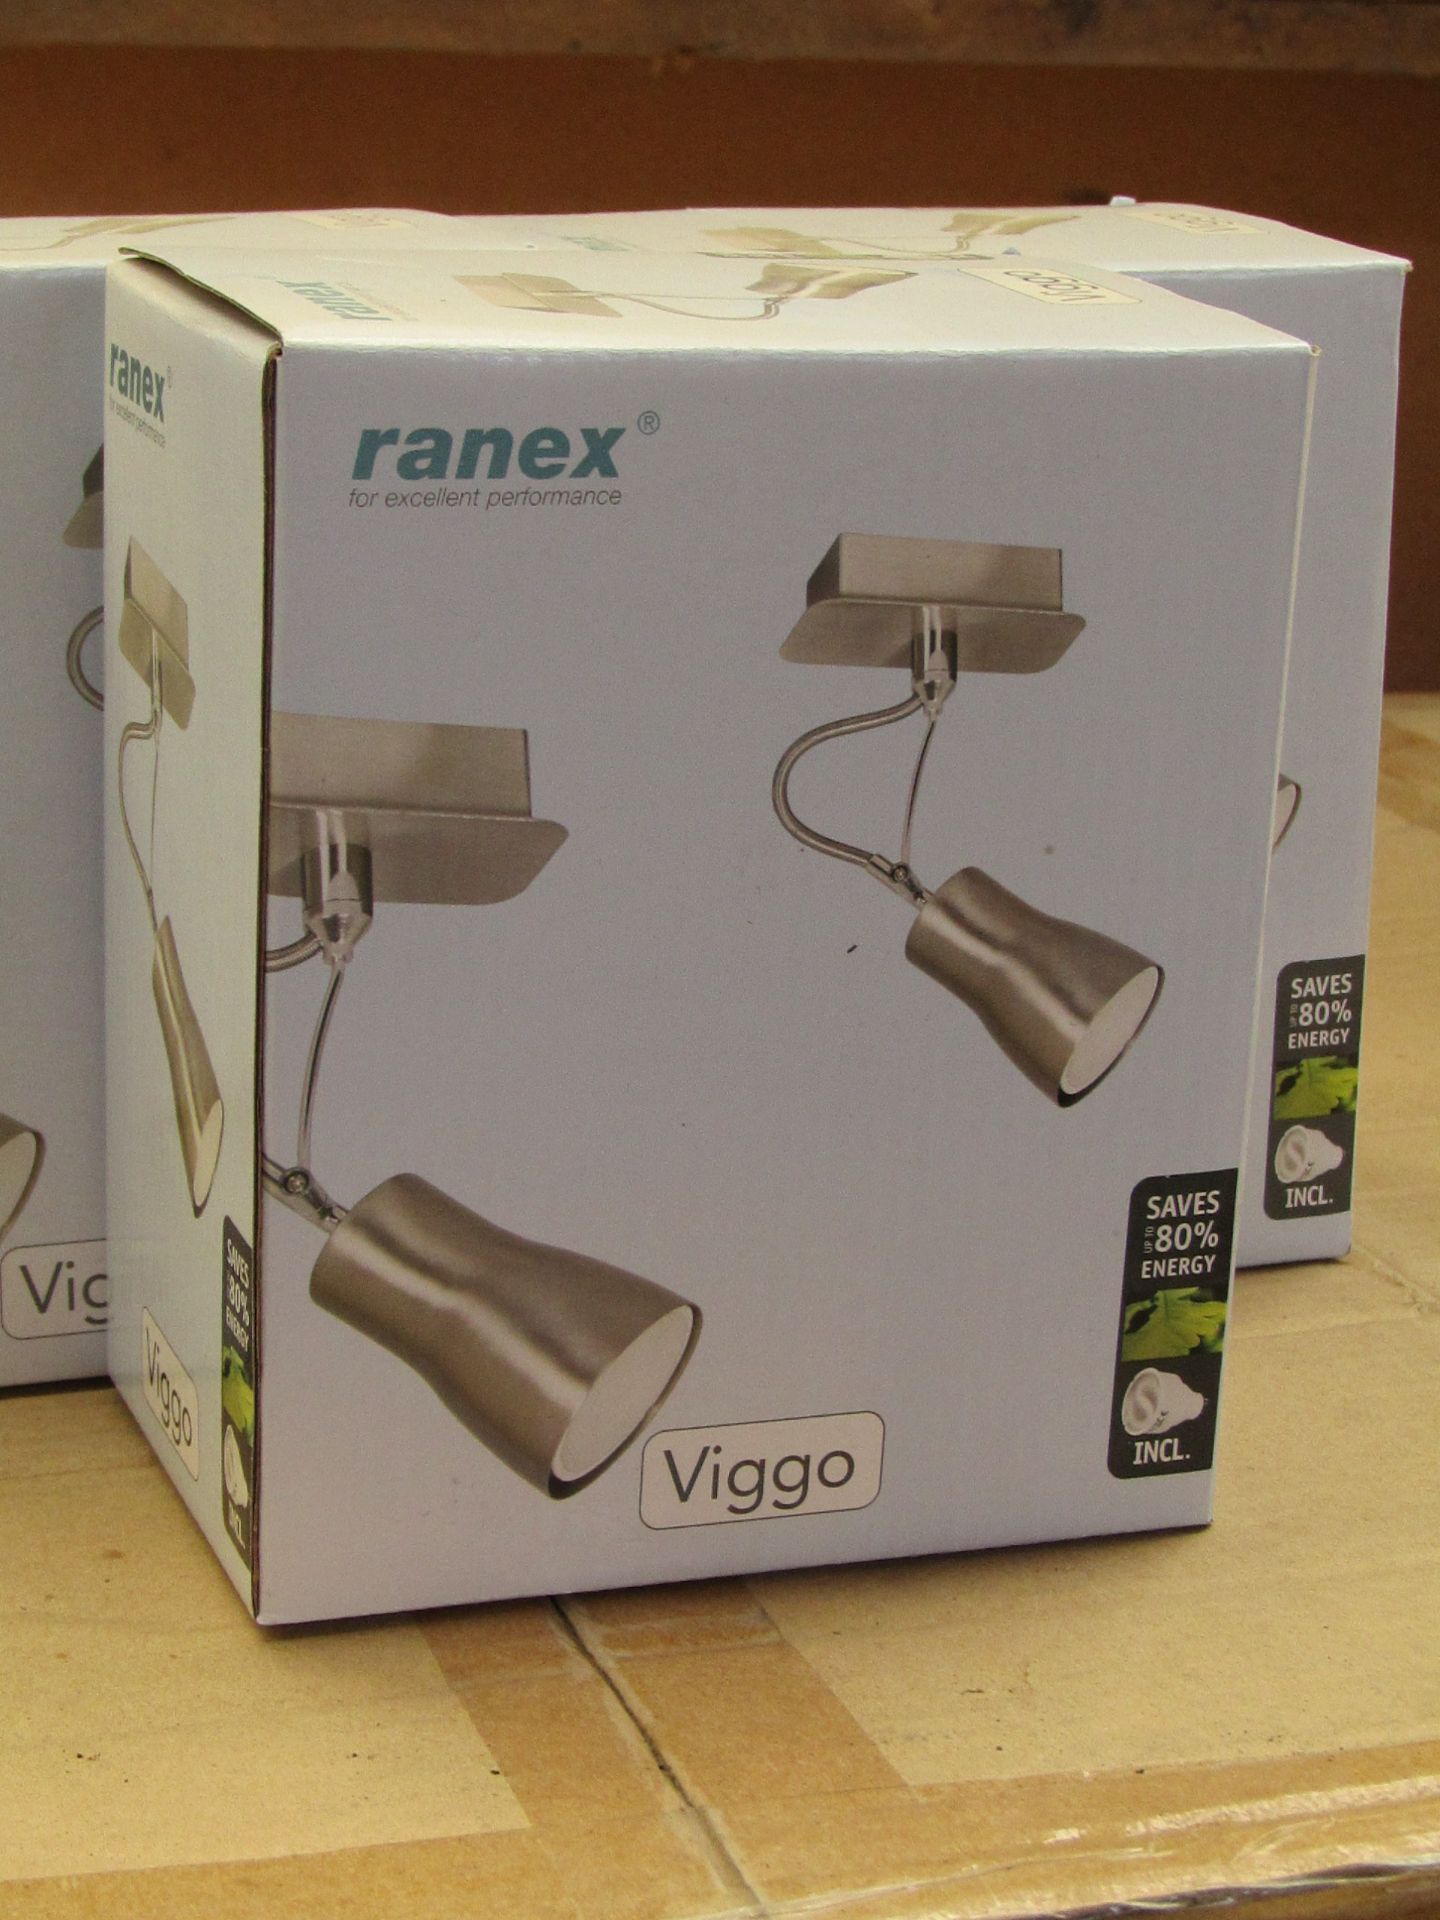 5x Ranex Viggo light fitting with 80% energy saving light bulb included, new and boxed.